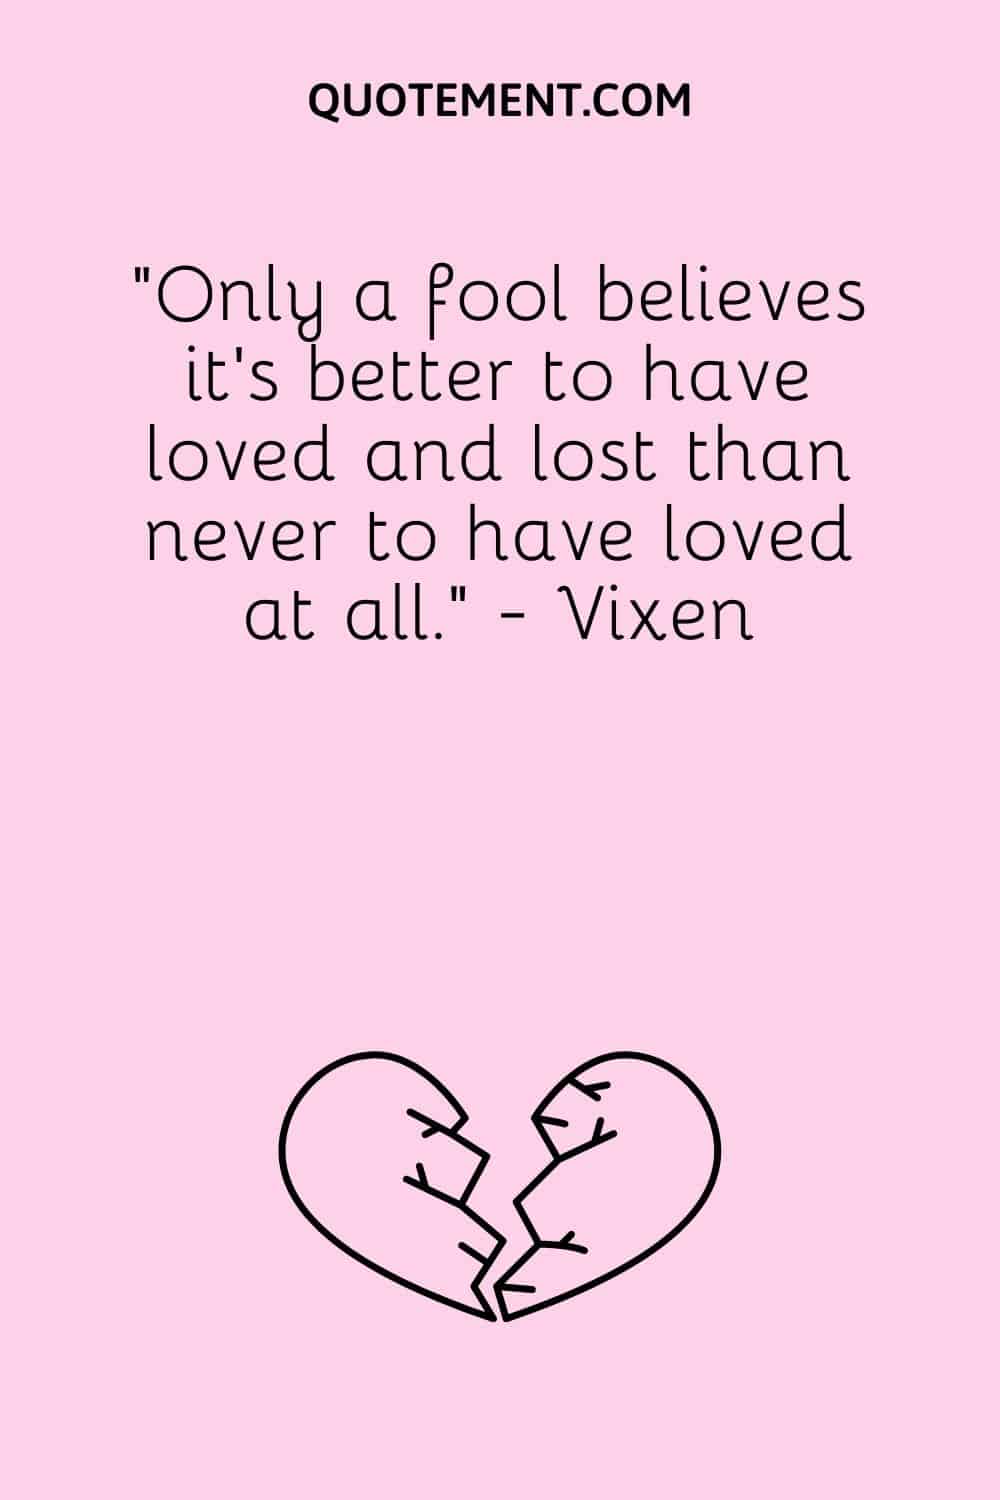 “Only a fool believes it's better to have loved and lost than never to have loved at all.” - Vixen